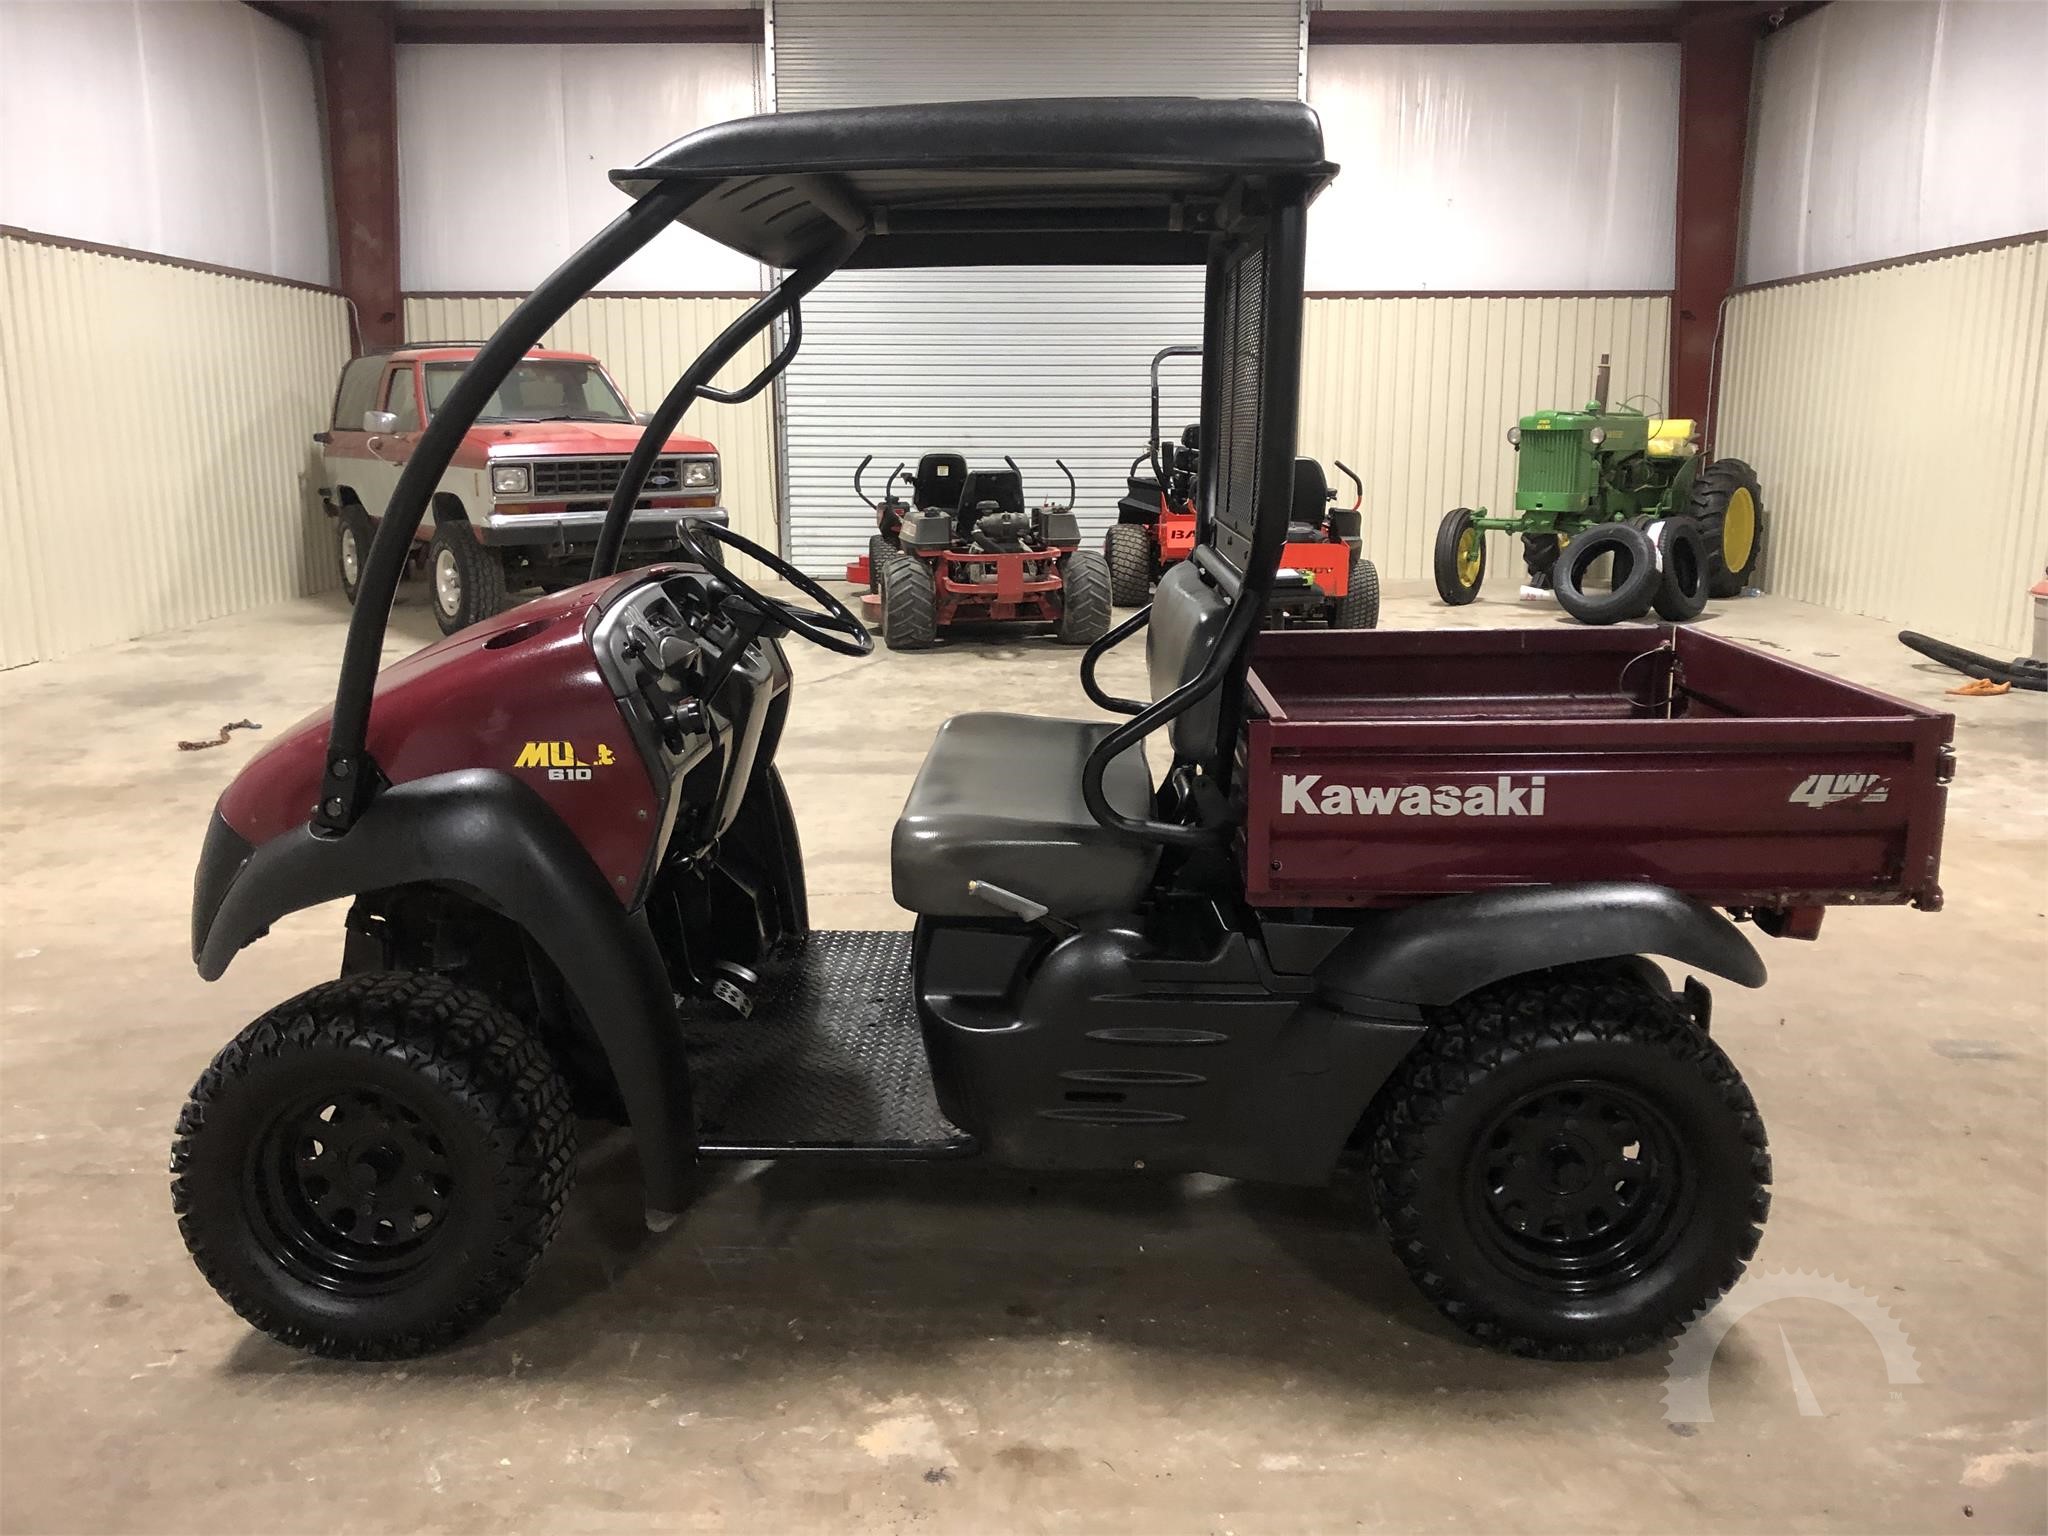 Kawasaki Mule 610 Auction Results 6 Listings Auctiontime Com Page 1 Of 1